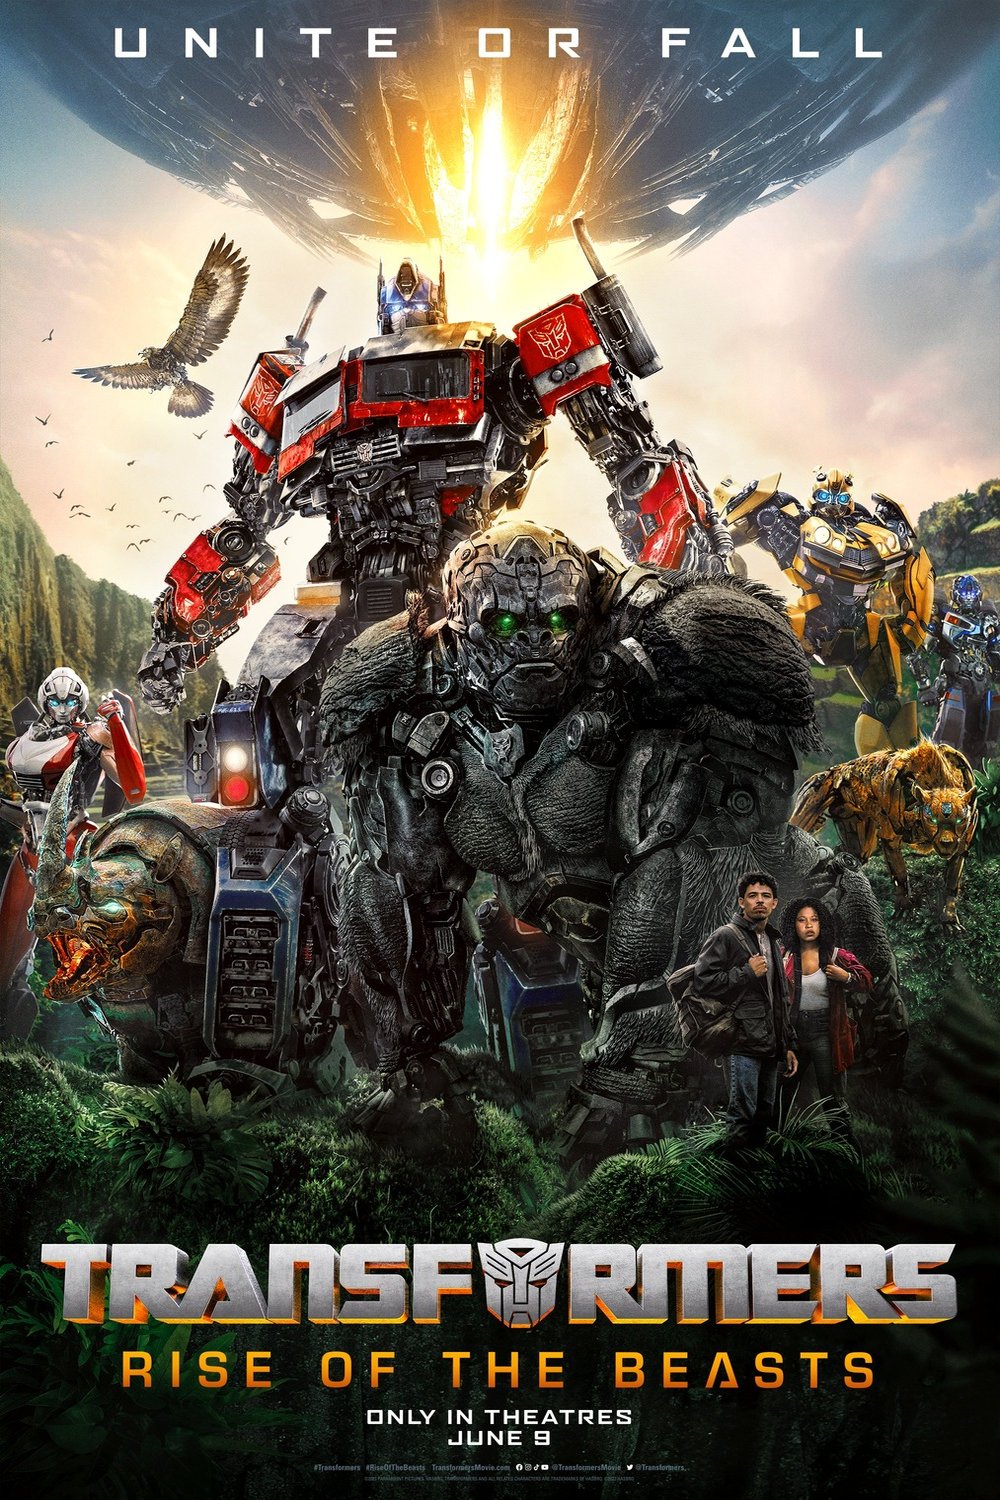 Poster of the movie Transformers: Rise of the Beasts